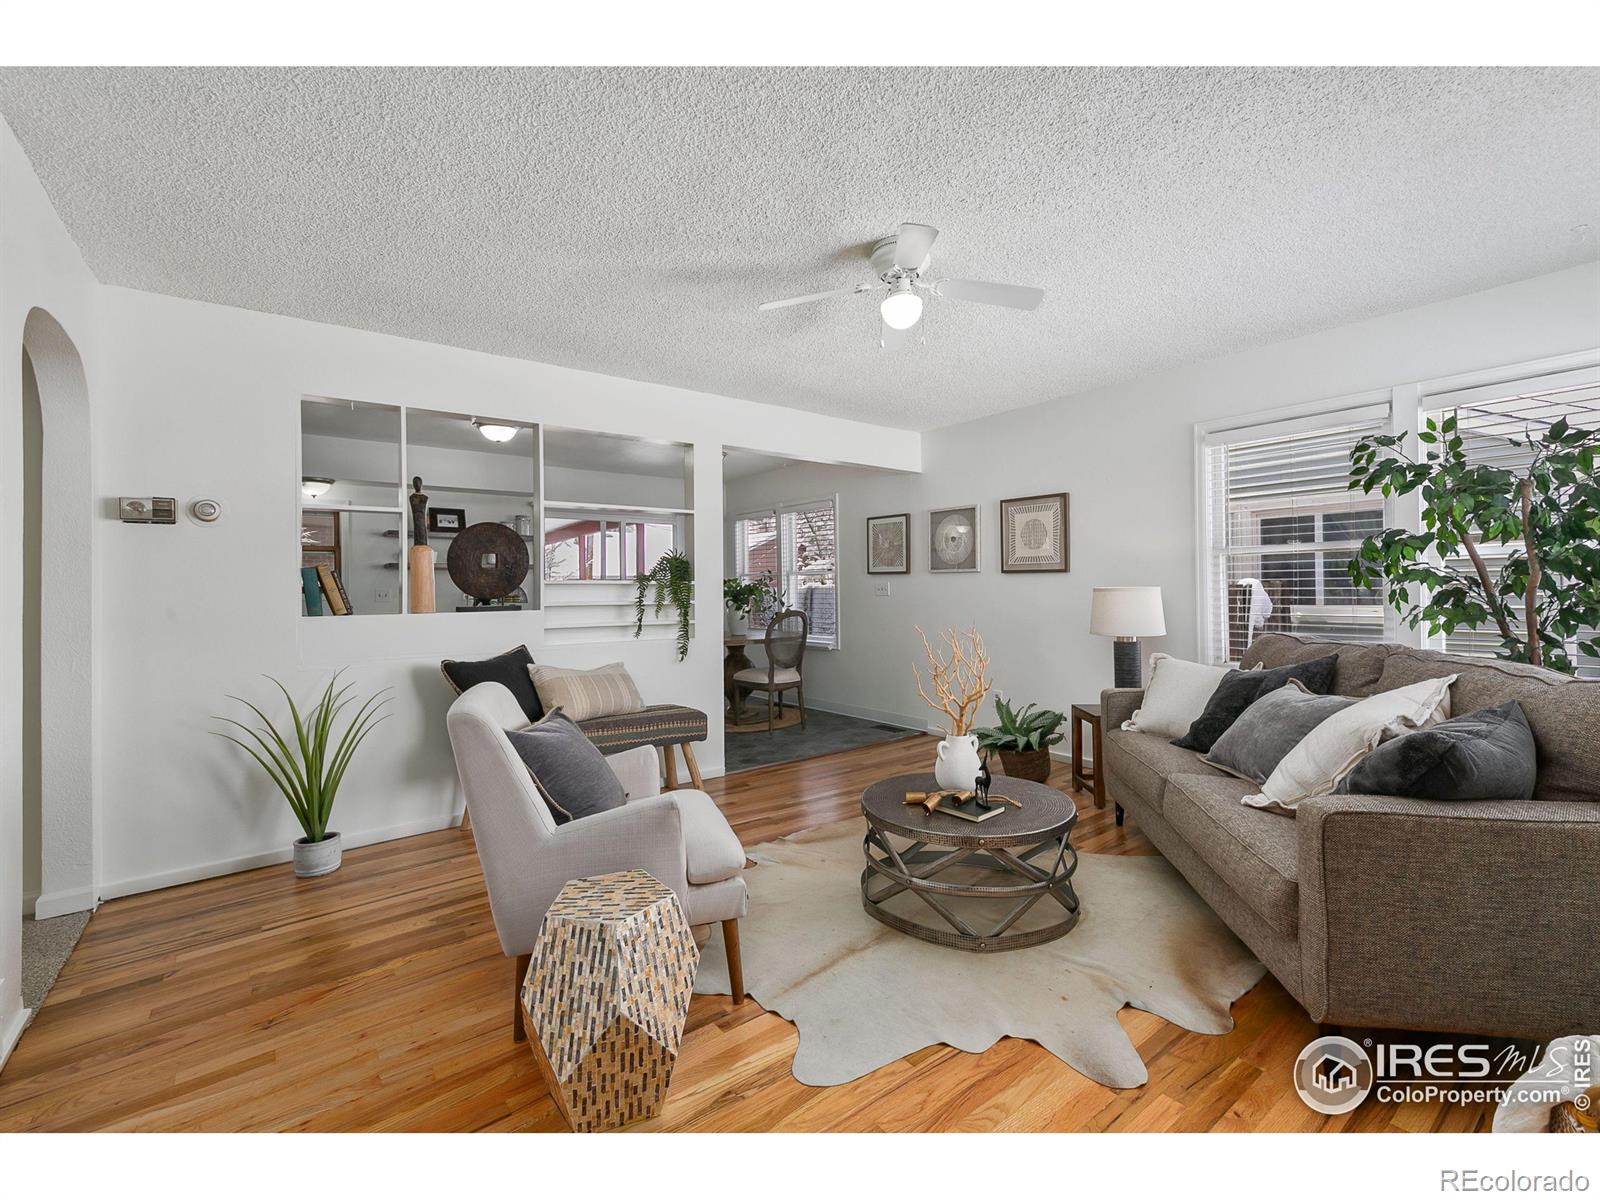 Report Image for 518 W 9th Street,Loveland, Colorado